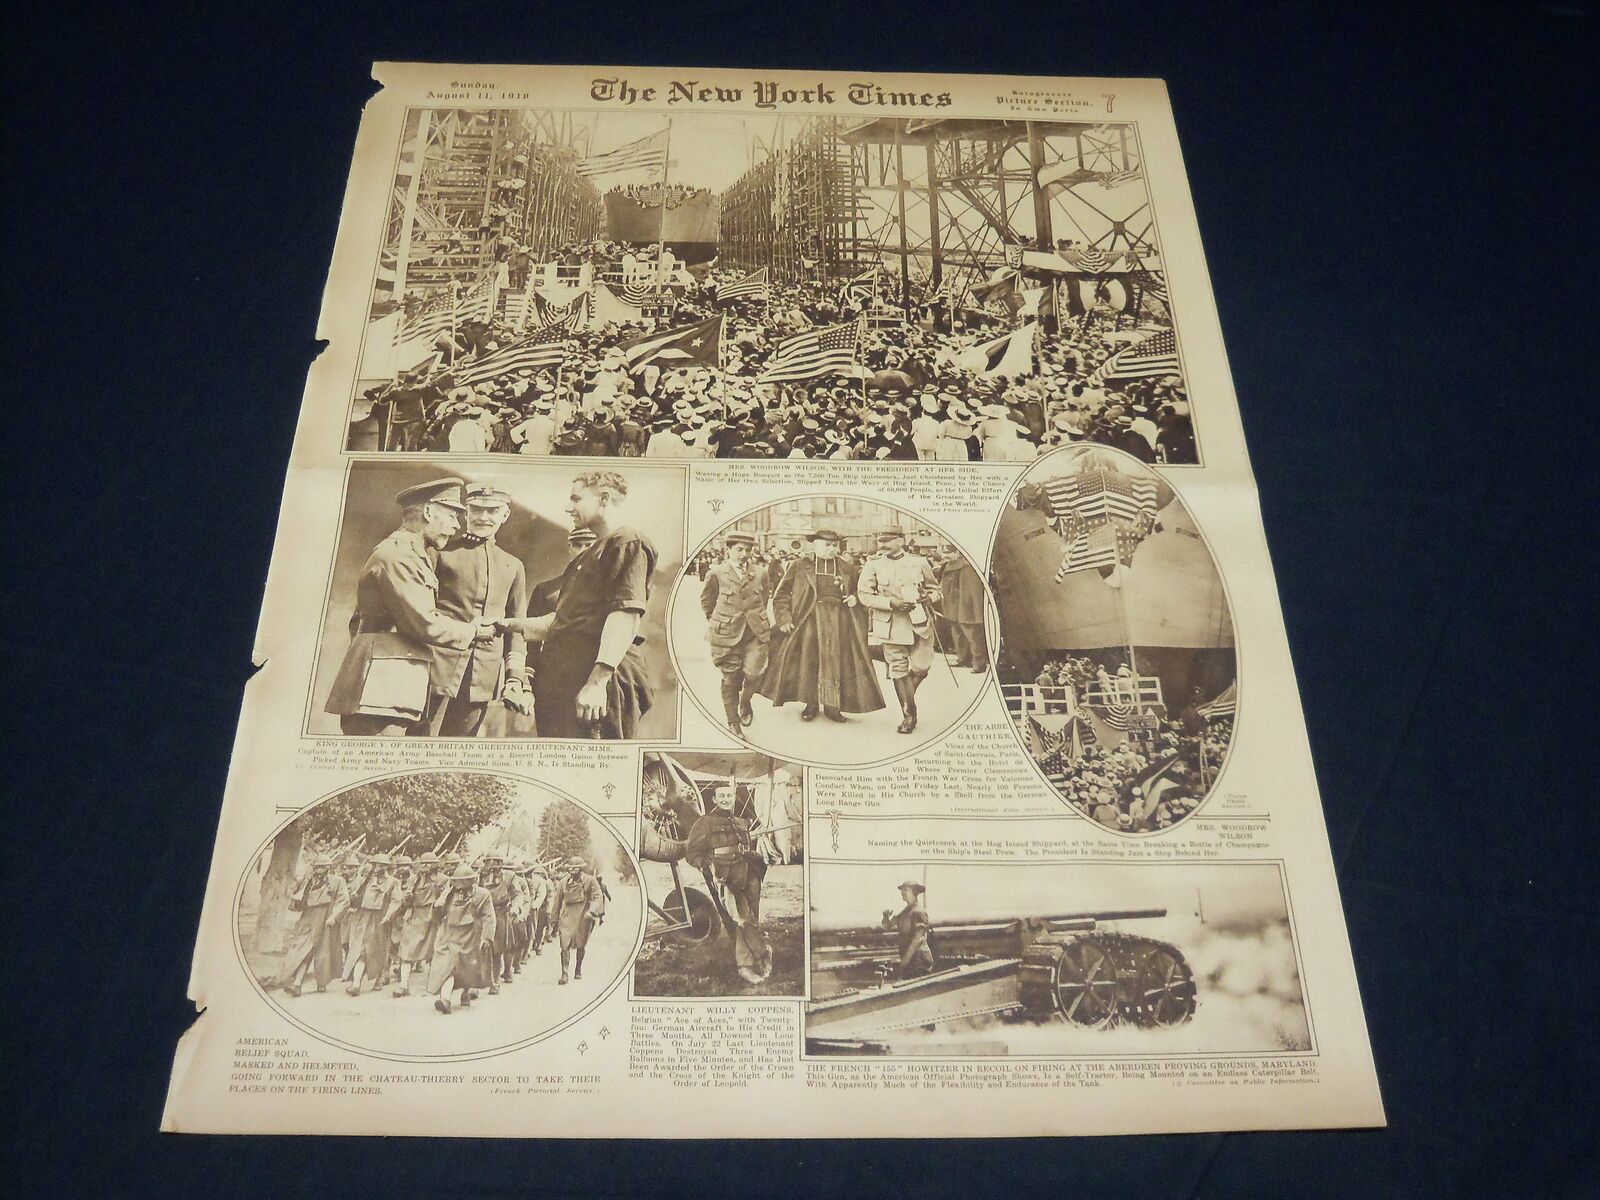 1918 AUGUST 11 NEW YORK TIMES PICTURE SECTION - VAUX & BOURESCHES - NT 8809